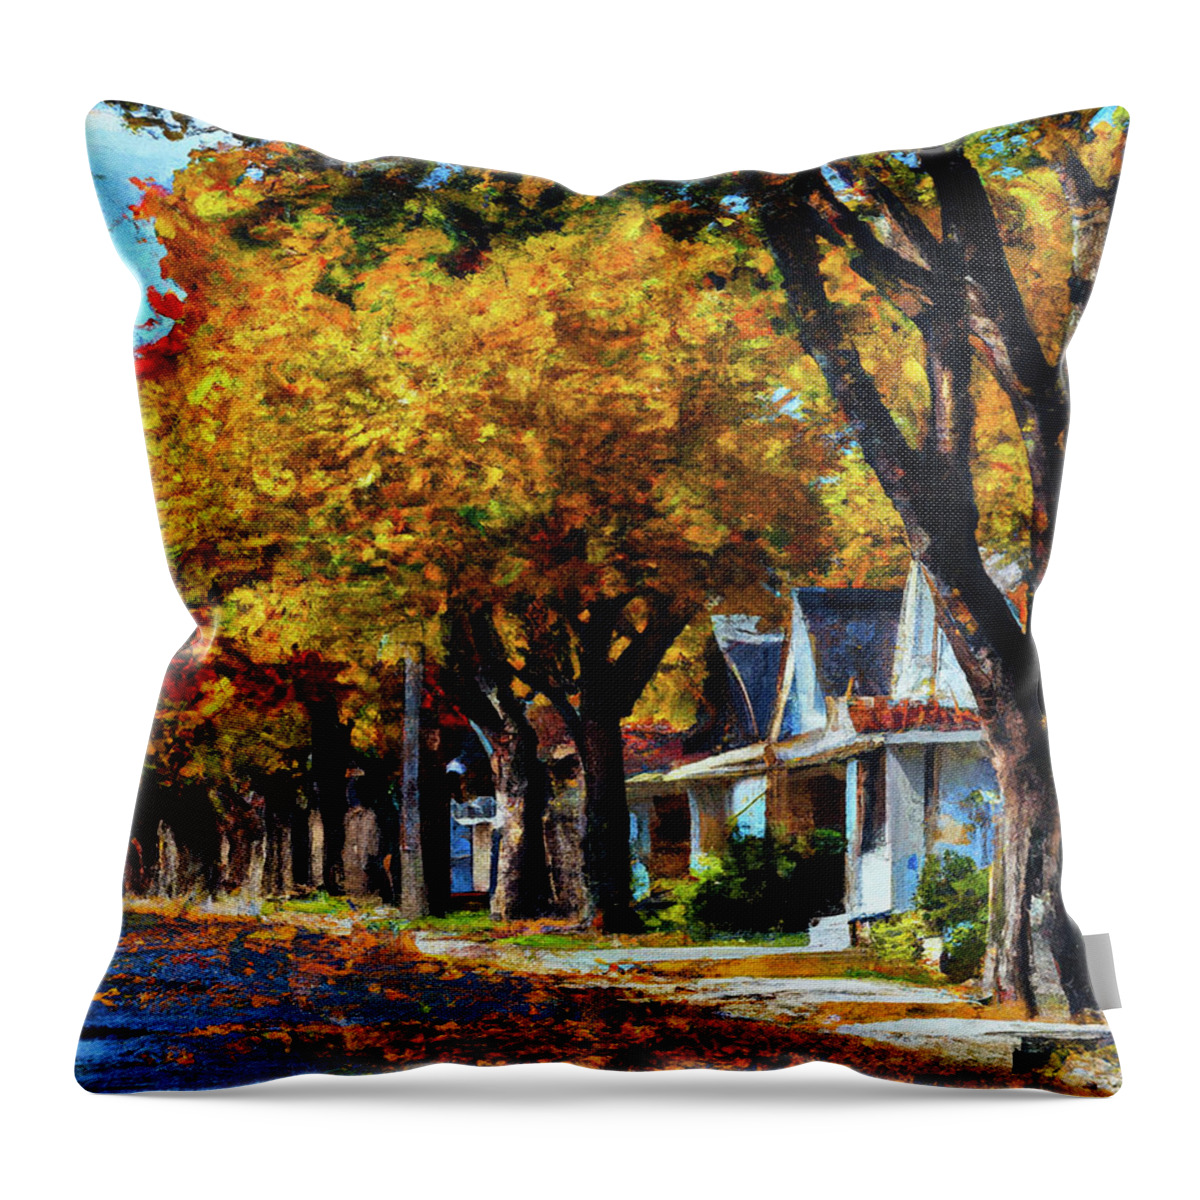 Row Of Houses Throw Pillow featuring the digital art Rainy October Day by Alison Frank